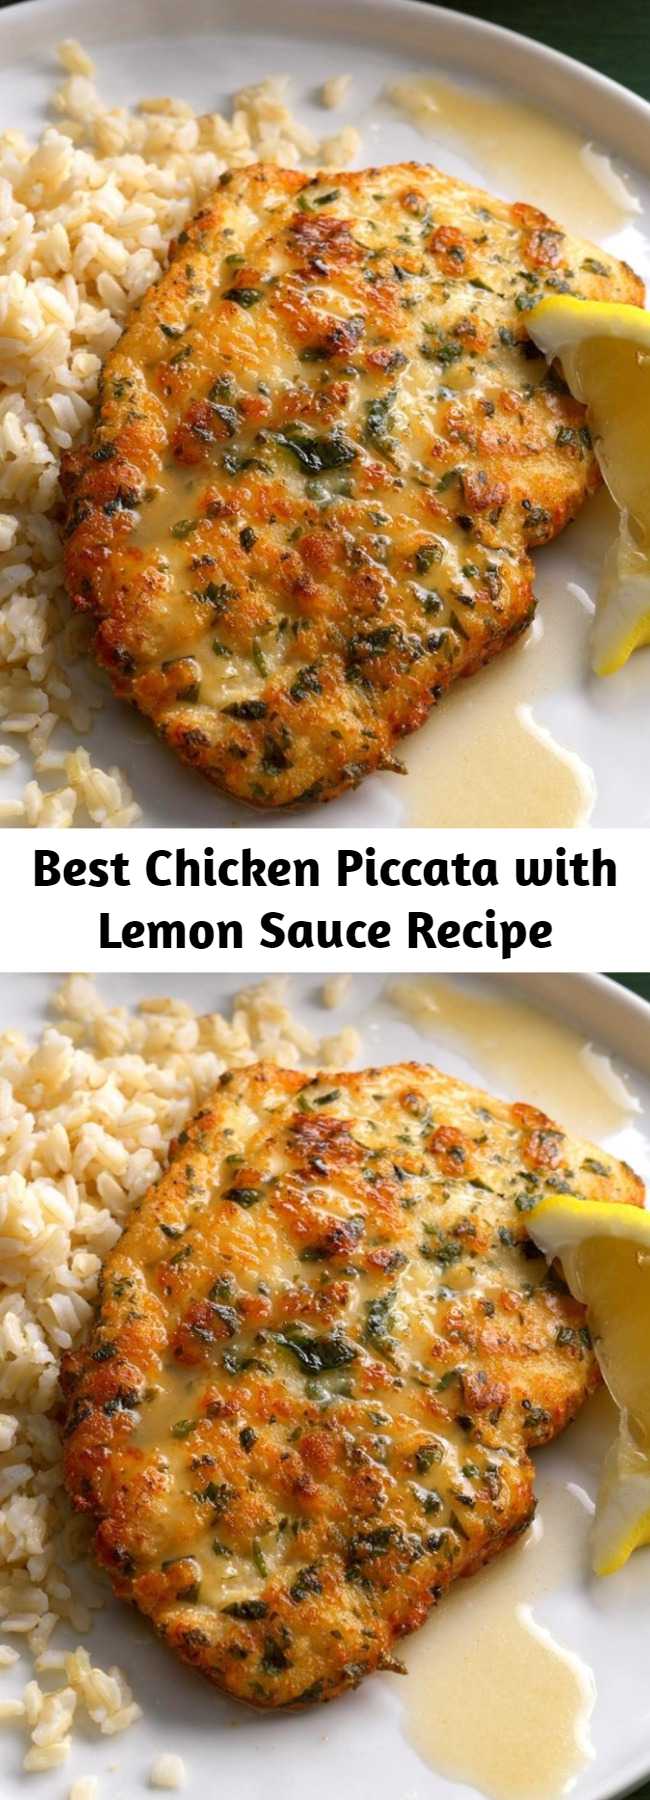 Best Chicken Piccata with Lemon Sauce Recipe - Once you've tried this tangy, yet delicate lemon chicken piccata, you won't hesitate to make it for company. Seasoned with parmesan and parsley, the chicken cooks up golden brown, then is drizzled with a light lemon sauce.